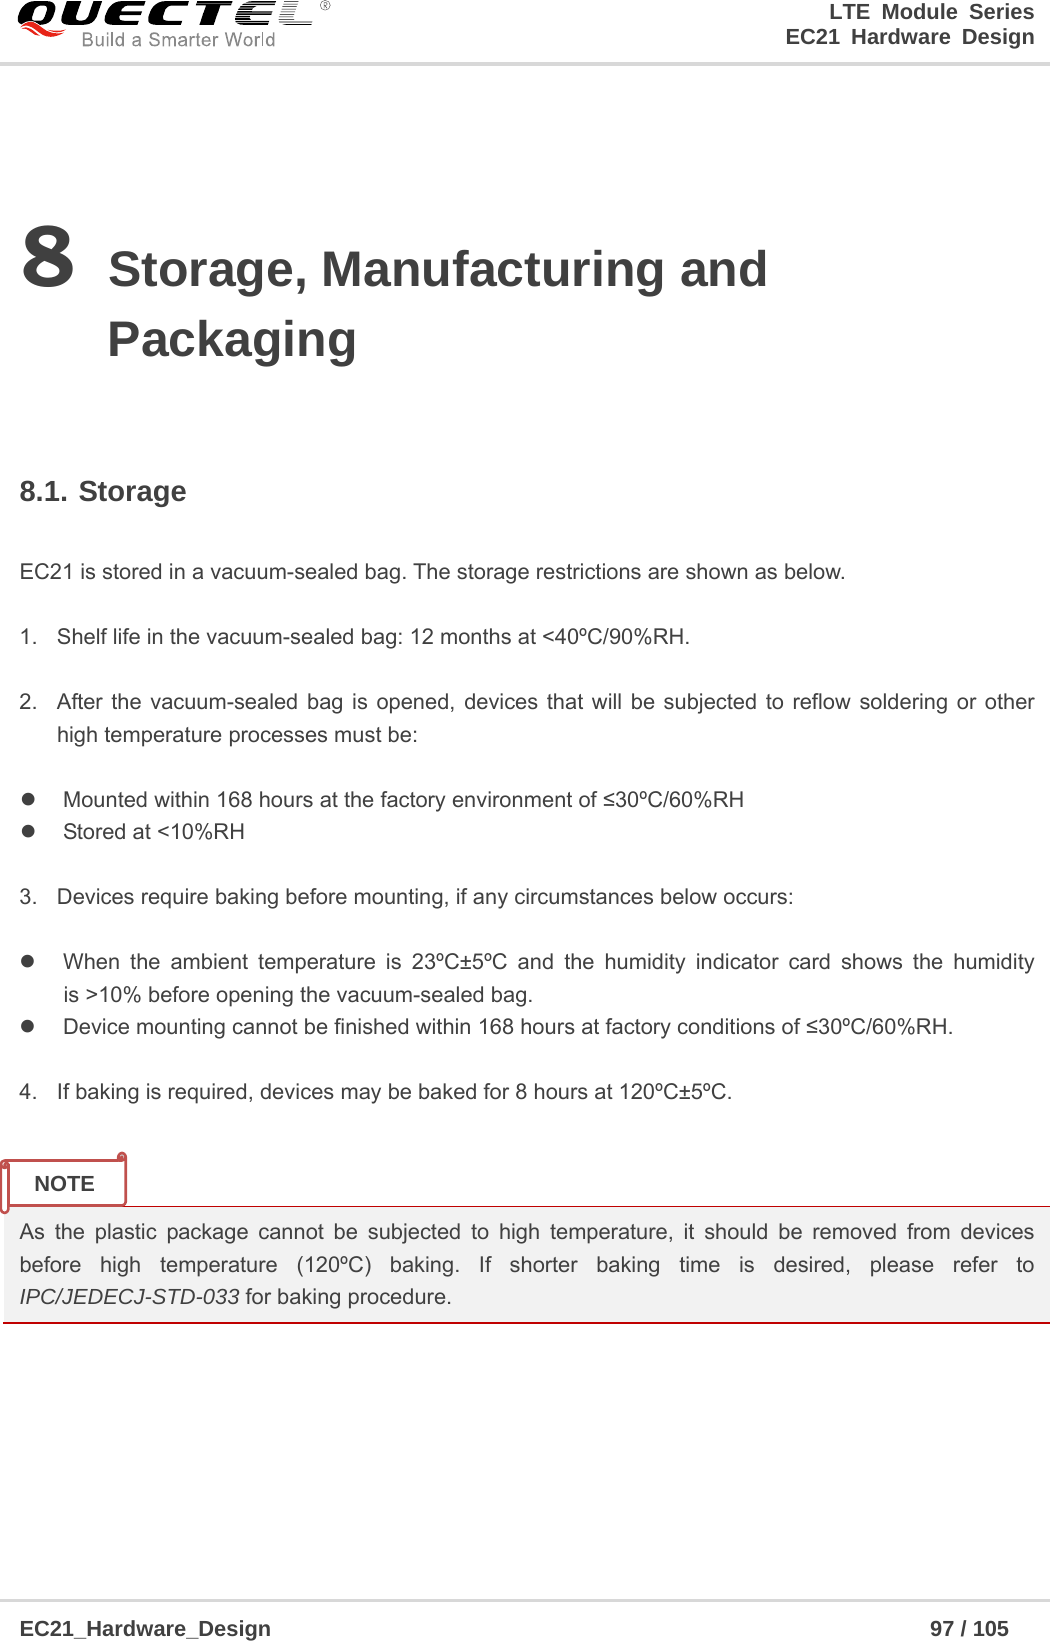                                                                        LTE Module Series                                                                 EC21 Hardware Design  EC21_Hardware_Design                                                            97 / 105    8 Storage, Manufacturing and Packaging  8.1. Storage  EC21 is stored in a vacuum-sealed bag. The storage restrictions are shown as below.    1.  Shelf life in the vacuum-sealed bag: 12 months at &lt;40ºC/90%RH.    2.  After the vacuum-sealed bag is opened, devices that will be subjected to reflow soldering or other high temperature processes must be:    Mounted within 168 hours at the factory environment of ≤30ºC/60%RH   Stored at &lt;10%RH  3.  Devices require baking before mounting, if any circumstances below occurs:    When the ambient temperature is 23ºC±5ºC and the humidity indicator card shows the humidity is &gt;10% before opening the vacuum-sealed bag.   Device mounting cannot be finished within 168 hours at factory conditions of ≤30ºC/60%RH.  4.  If baking is required, devices may be baked for 8 hours at 120ºC±5ºC.   As the plastic package cannot be subjected to high temperature, it should be removed from devices before high temperature (120ºC) baking. If shorter baking time is desired, please refer to IPC/JEDECJ-STD-033 for baking procedure.    NOTE 